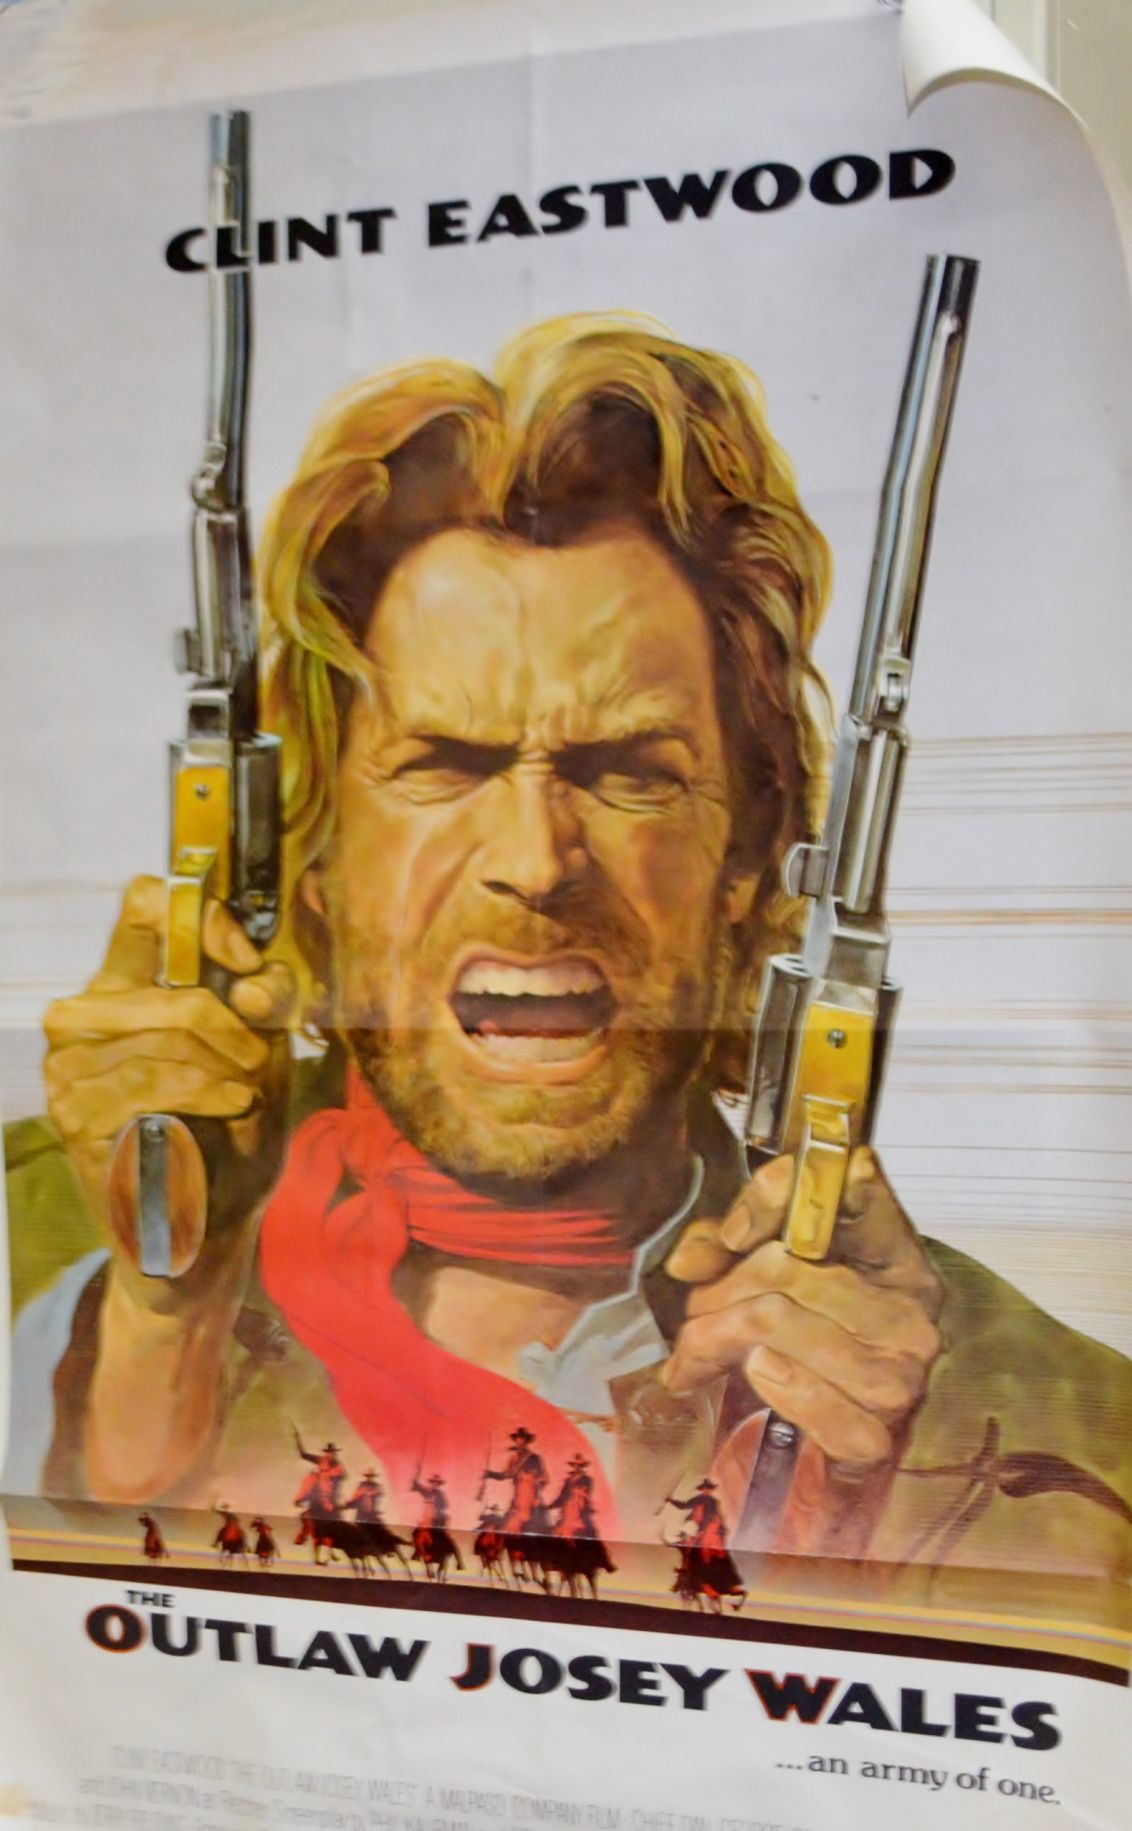 Clint Eastwood Legend Awesome New POSTER Army 